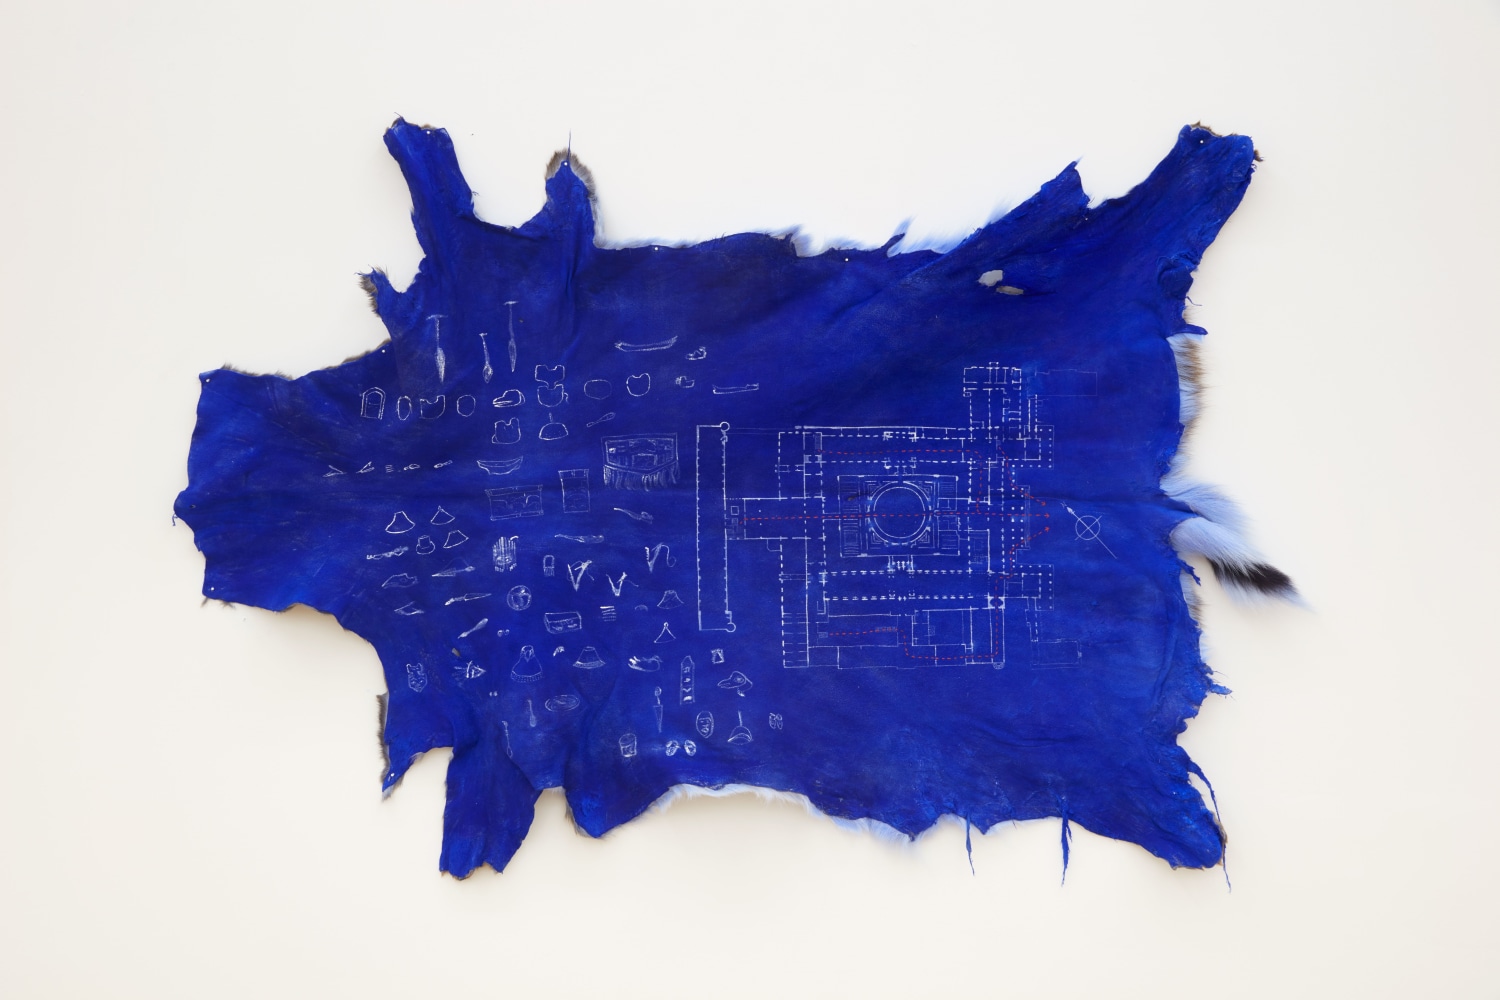 &amp;nbsp;

Nicholas Galanin

Architecture of return, escape (The British Museum), 2022

pigment and acrylic on deer hide

35 3/4 x 55 1/2 inches (90.8 x 141 cm)

(NGA22-07)